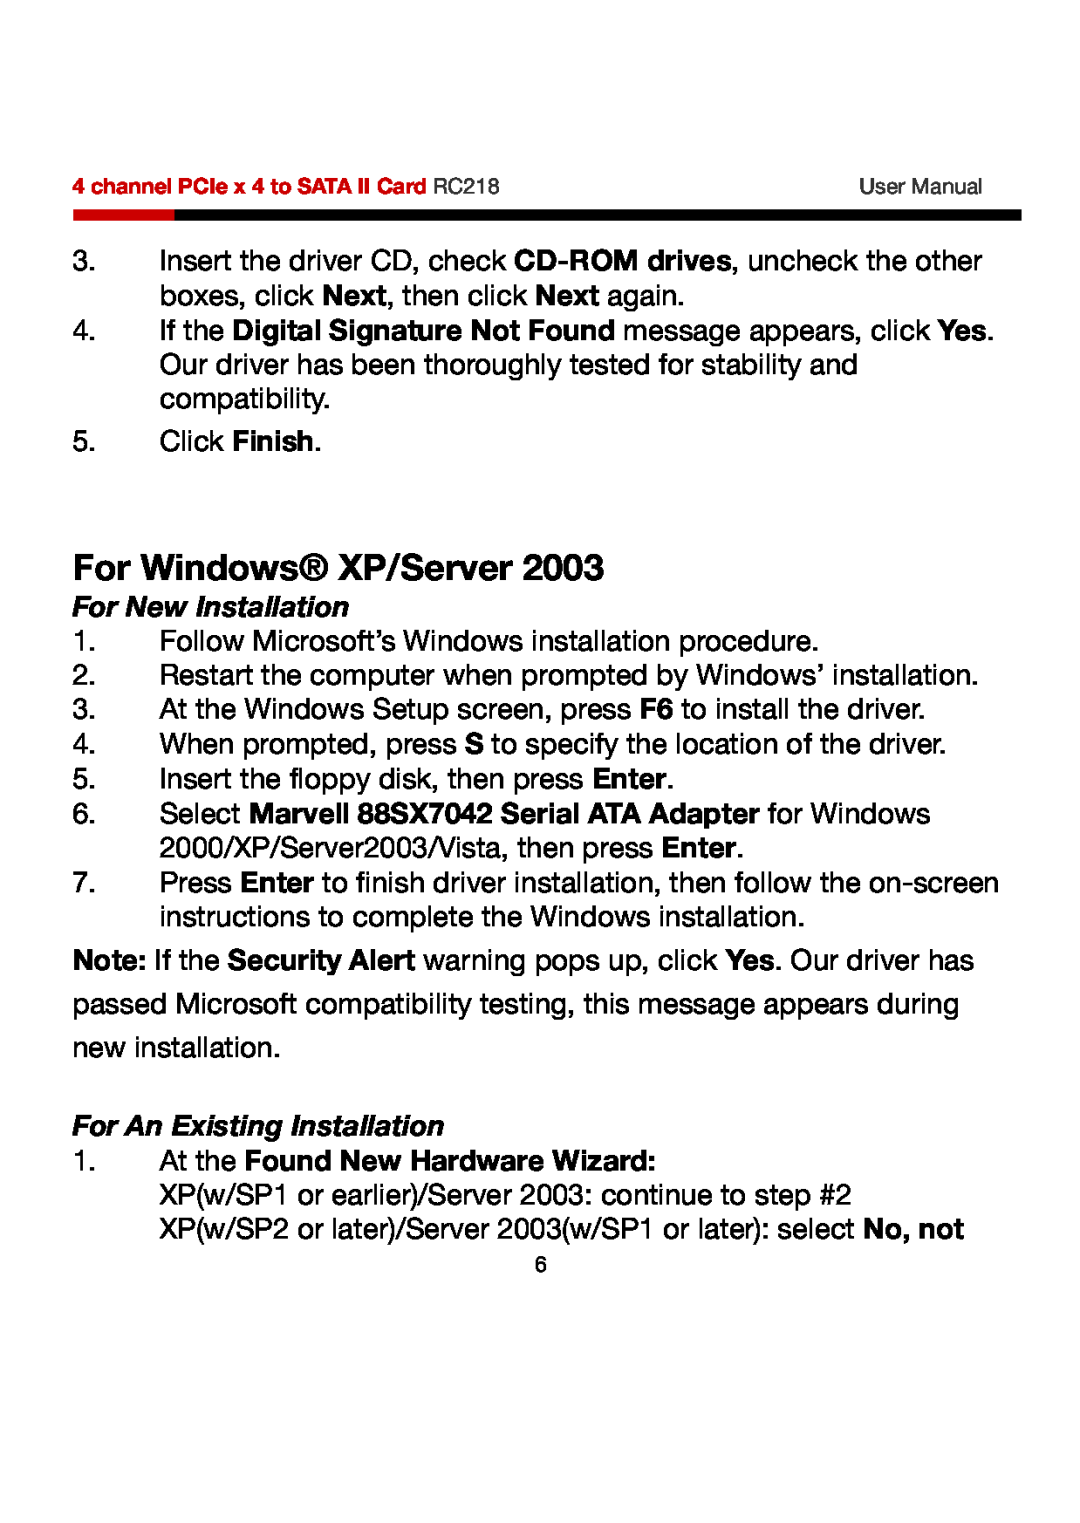 Rosewill RC218 user manual For Windows XP/Server, For New Installation, For An Existing Installation 